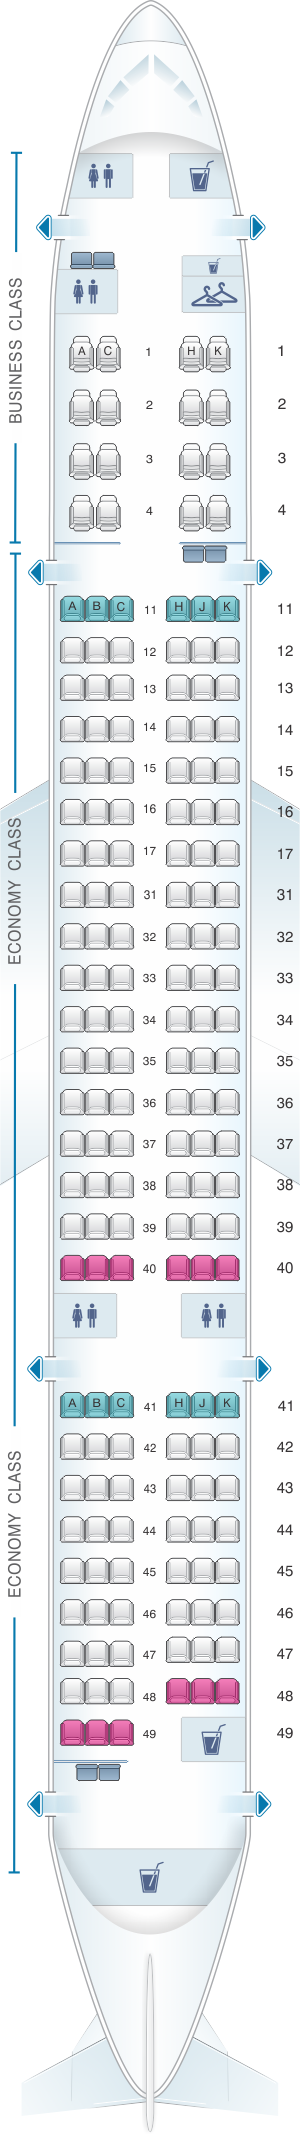 Seat map for Air Astana Boeing B757 200